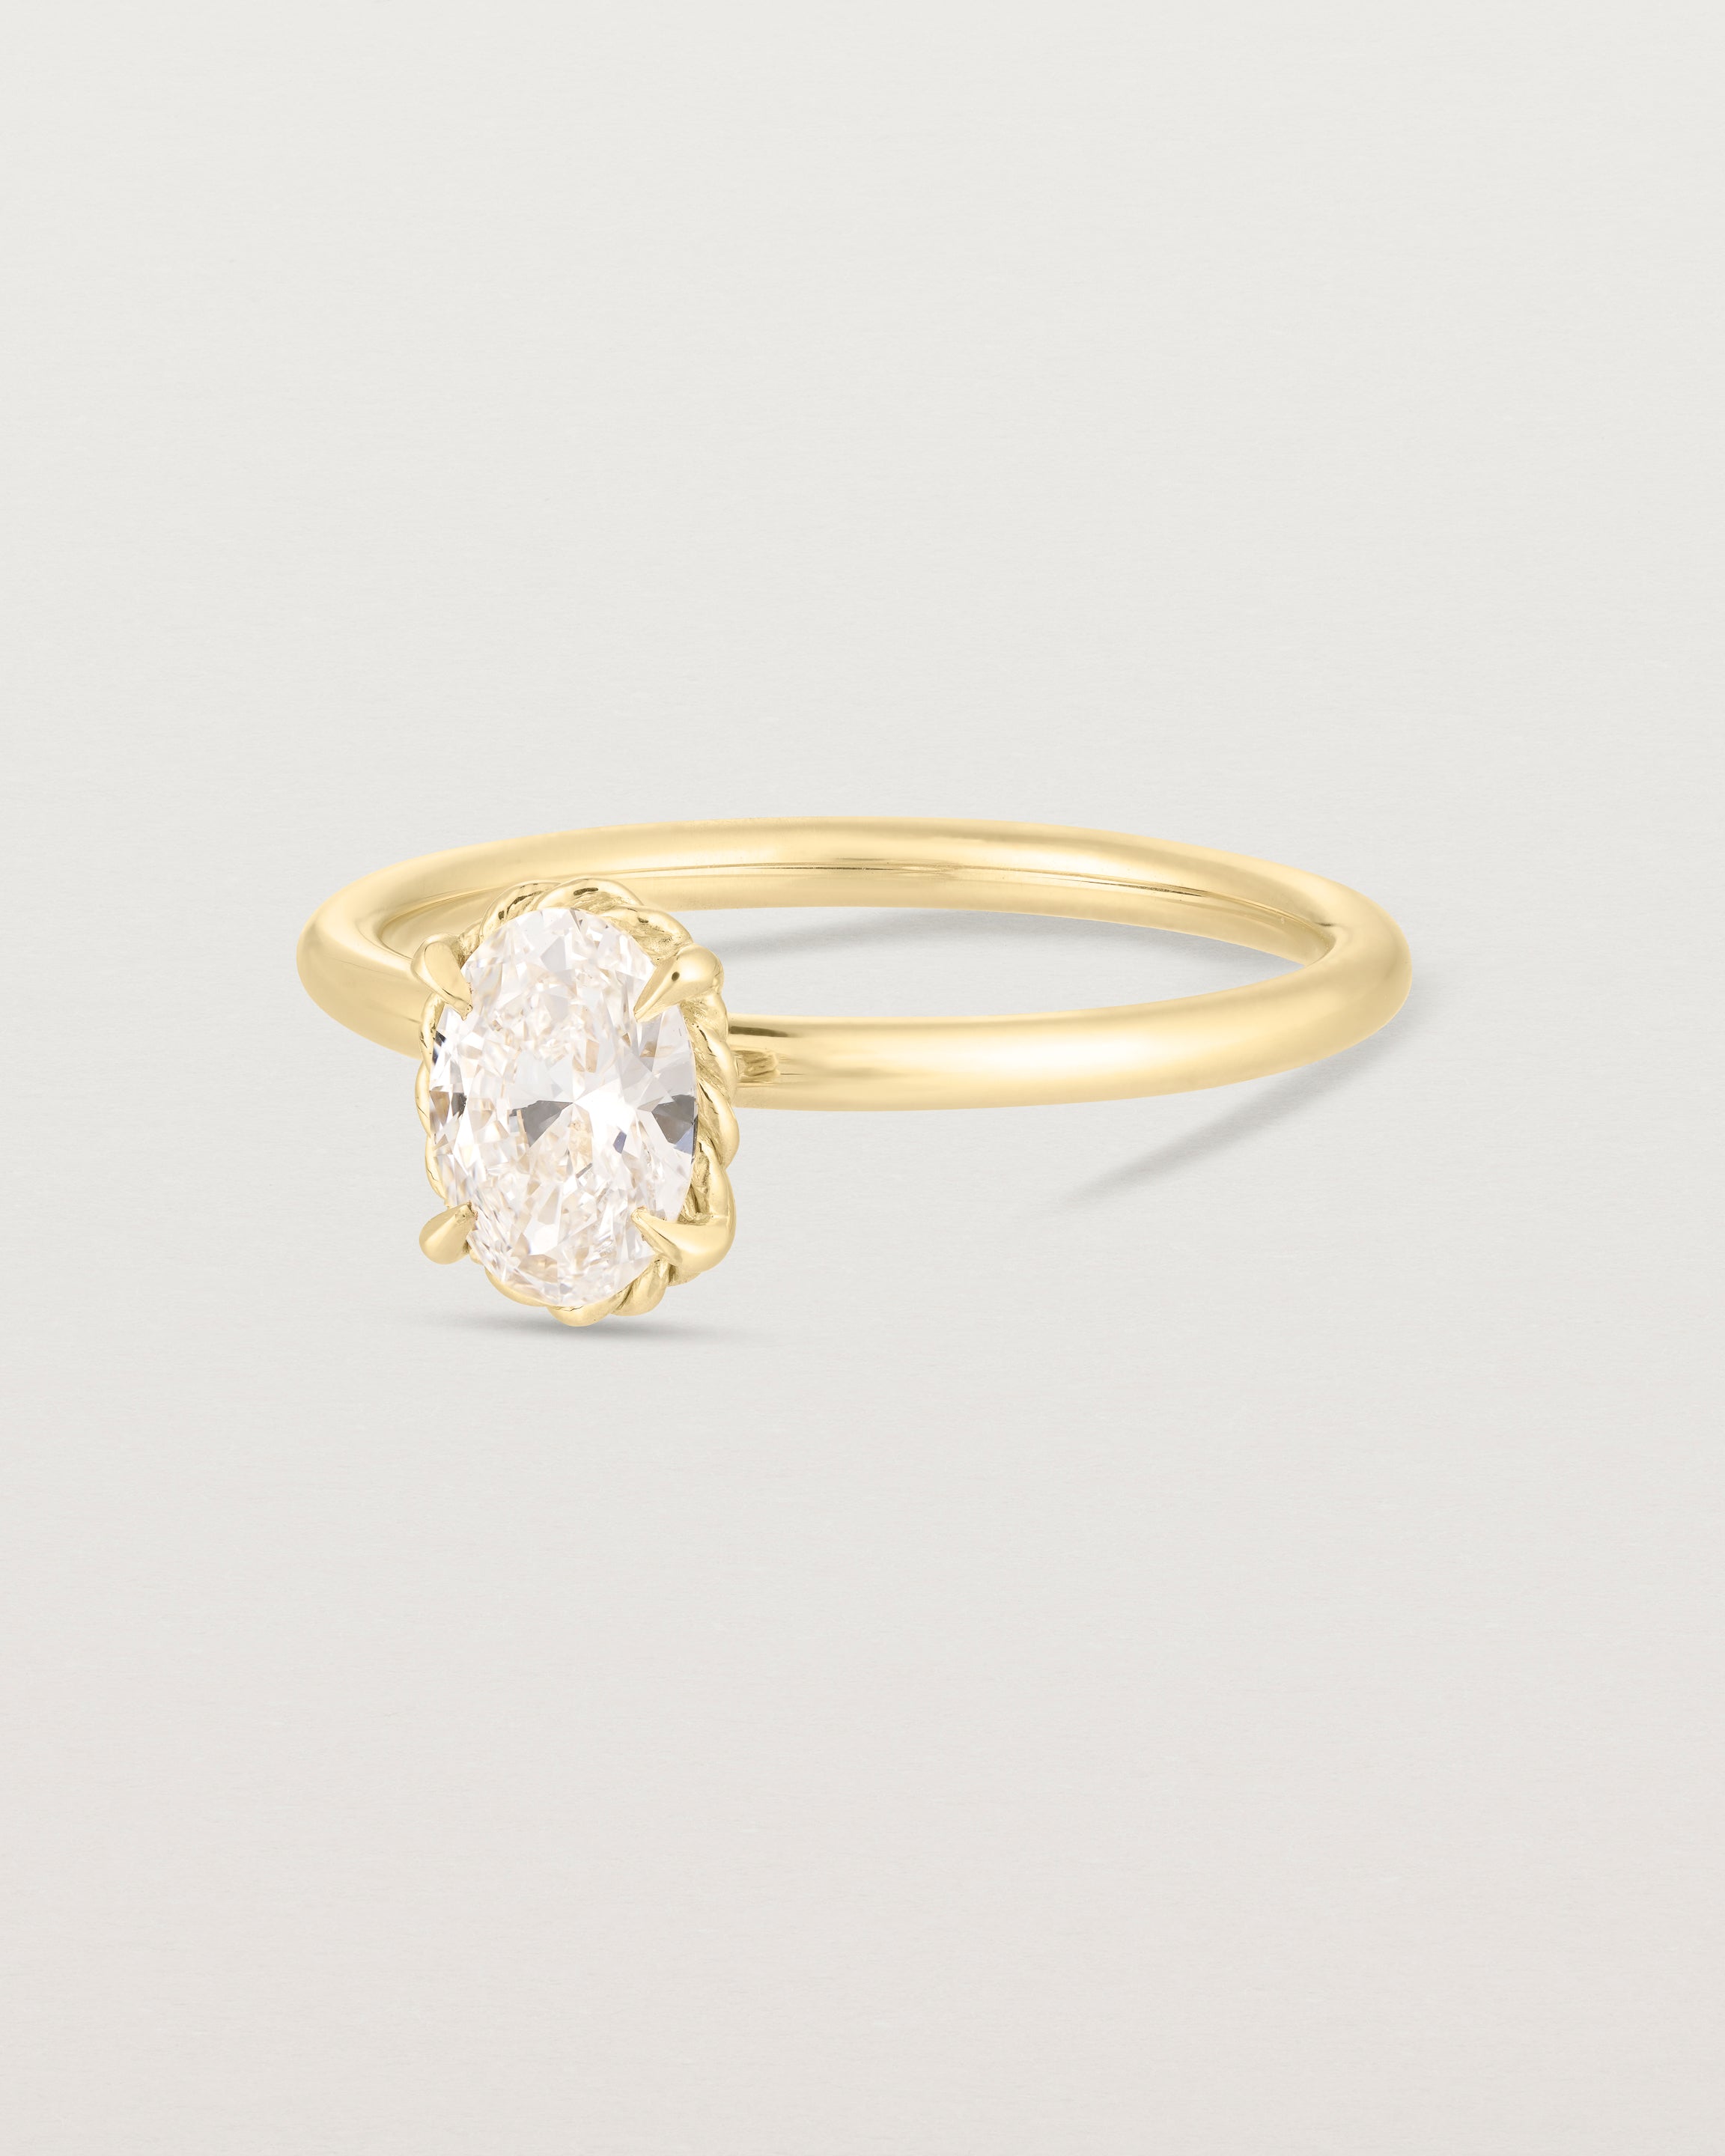 Side image of yellow gold oval diamond solitaire